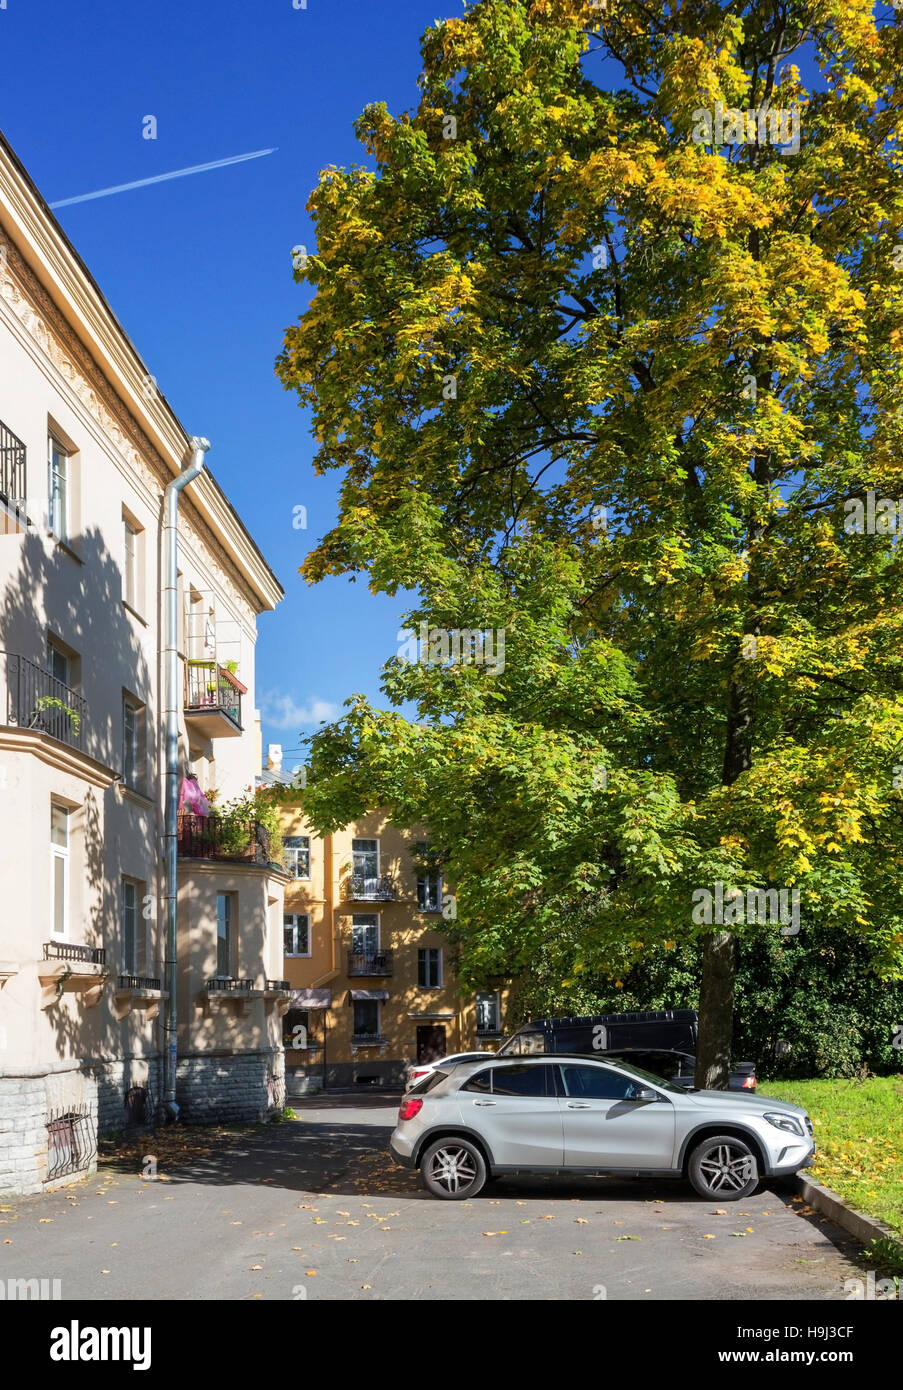 Car in the courtyard under the tree and the plane in the sky at sunny autumn day. Stock Photo